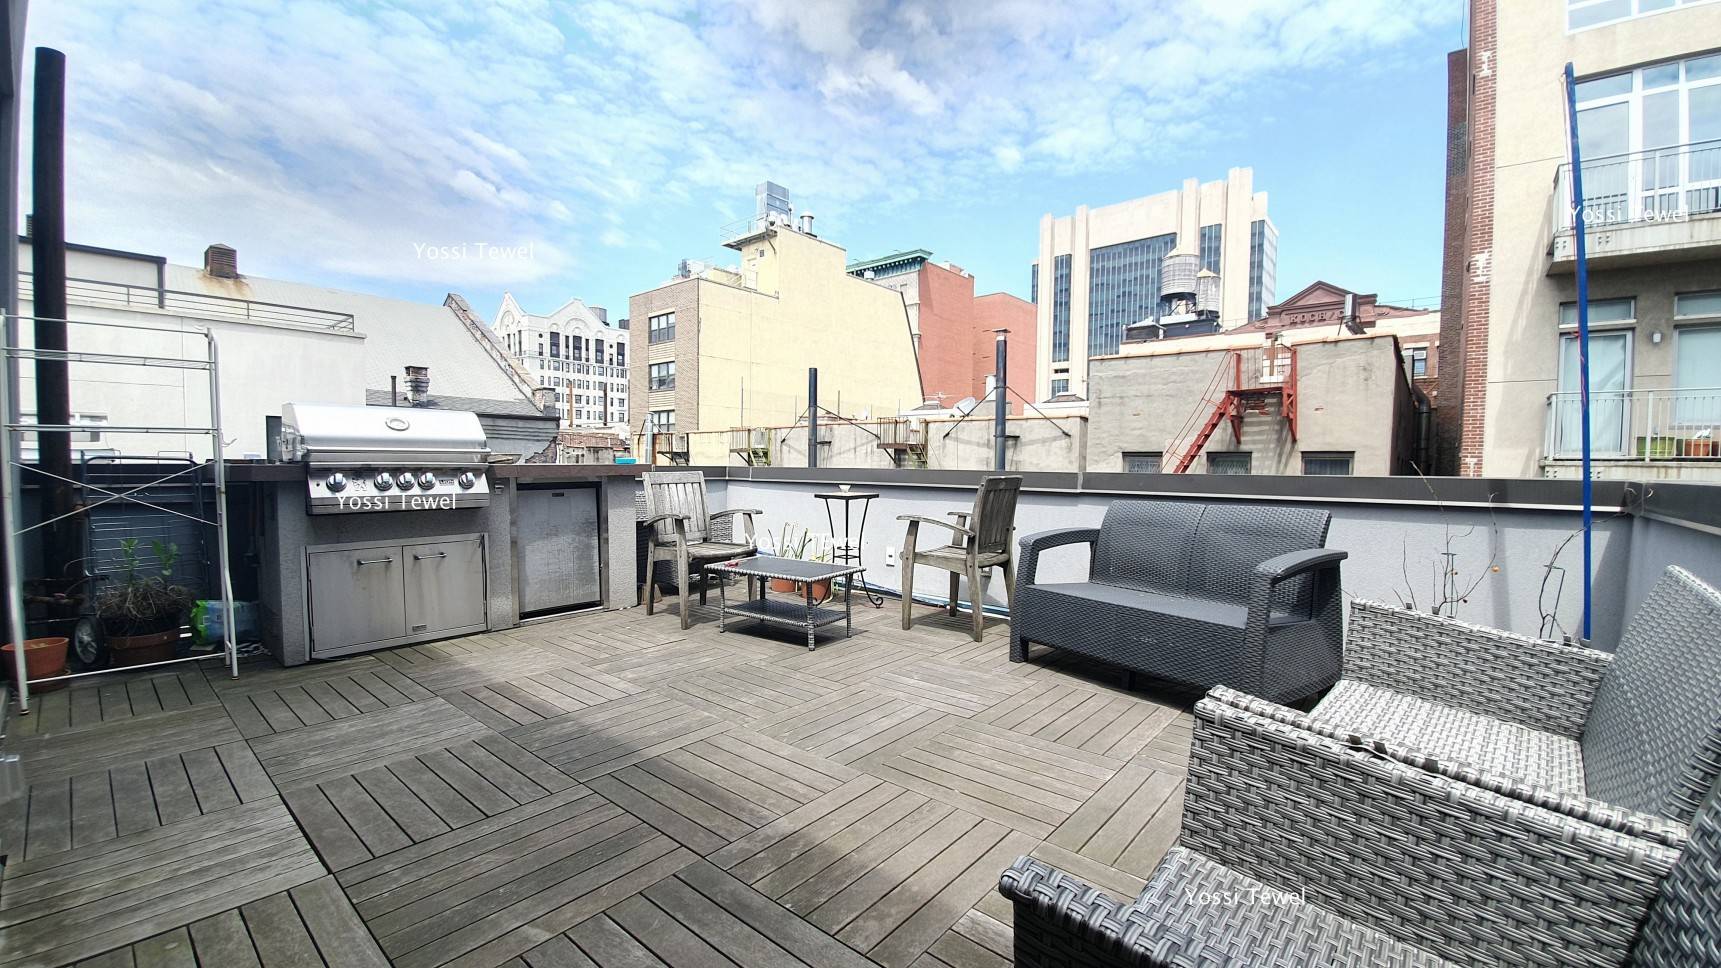 4 bed 2 bath DUPLEX PENTHOUSE Home with Huge Private roof deck !